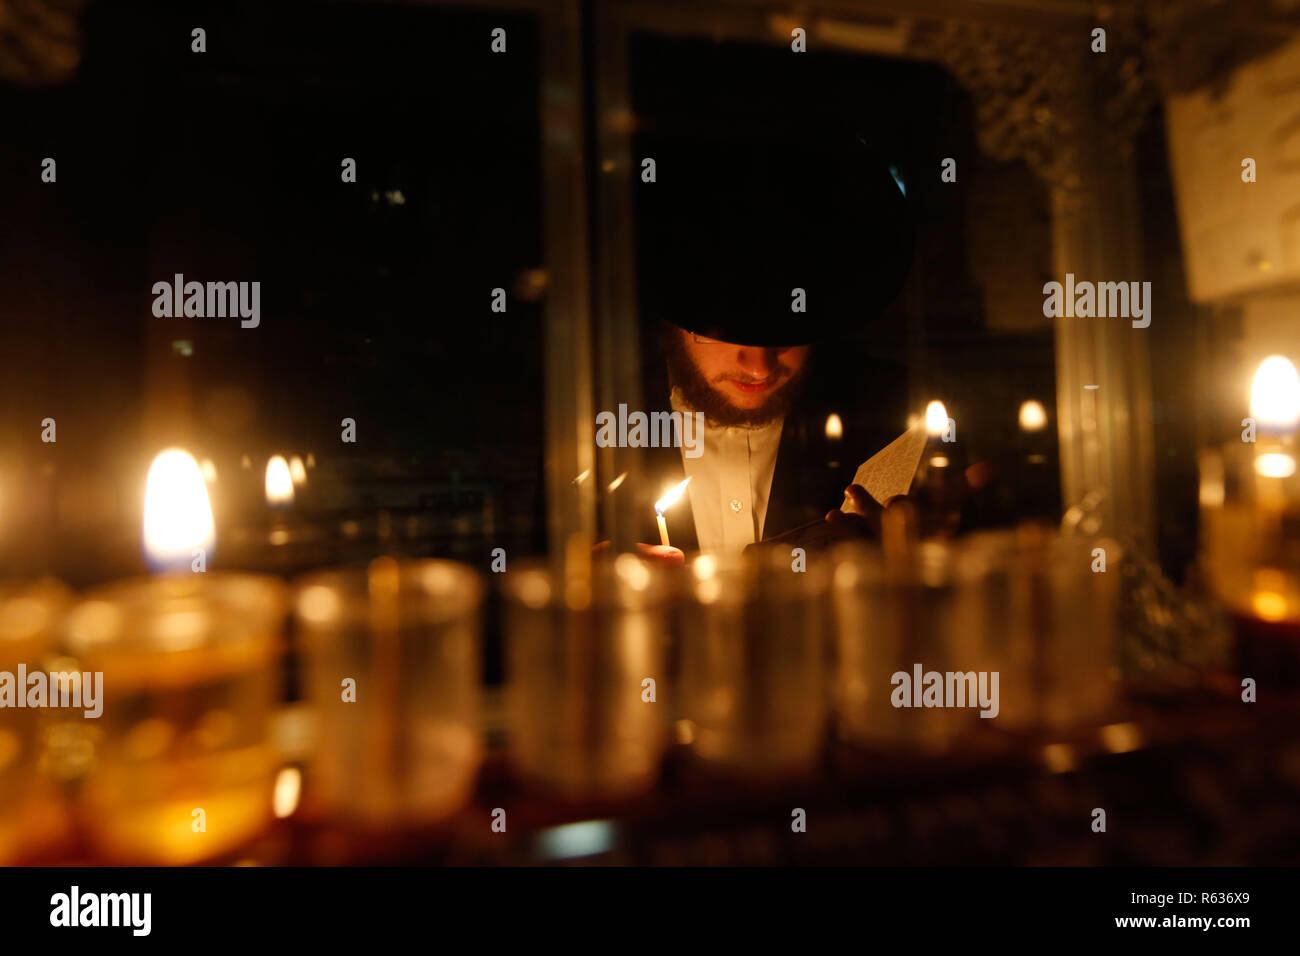 Jerusalem. 3rd Dec, 2018. An ultra-Orthodox Jewish man lights a candle during Hanukkah in Mea Shearim neighborhood in Jerusalem, on Dec. 3, 2018. Hanukkah, also known as the Festival of Lights and Feast of Dedication, is an eight-day Jewish holiday commemorating the rededication of the Holy Temple (the Second Temple) in Jerusalem at the time of the Maccabean Revolt against the Seleucid Empire of the 2nd Century B.C. Credit: Gil Cohen Magen/Xinhua/Alamy Live News Stock Photo